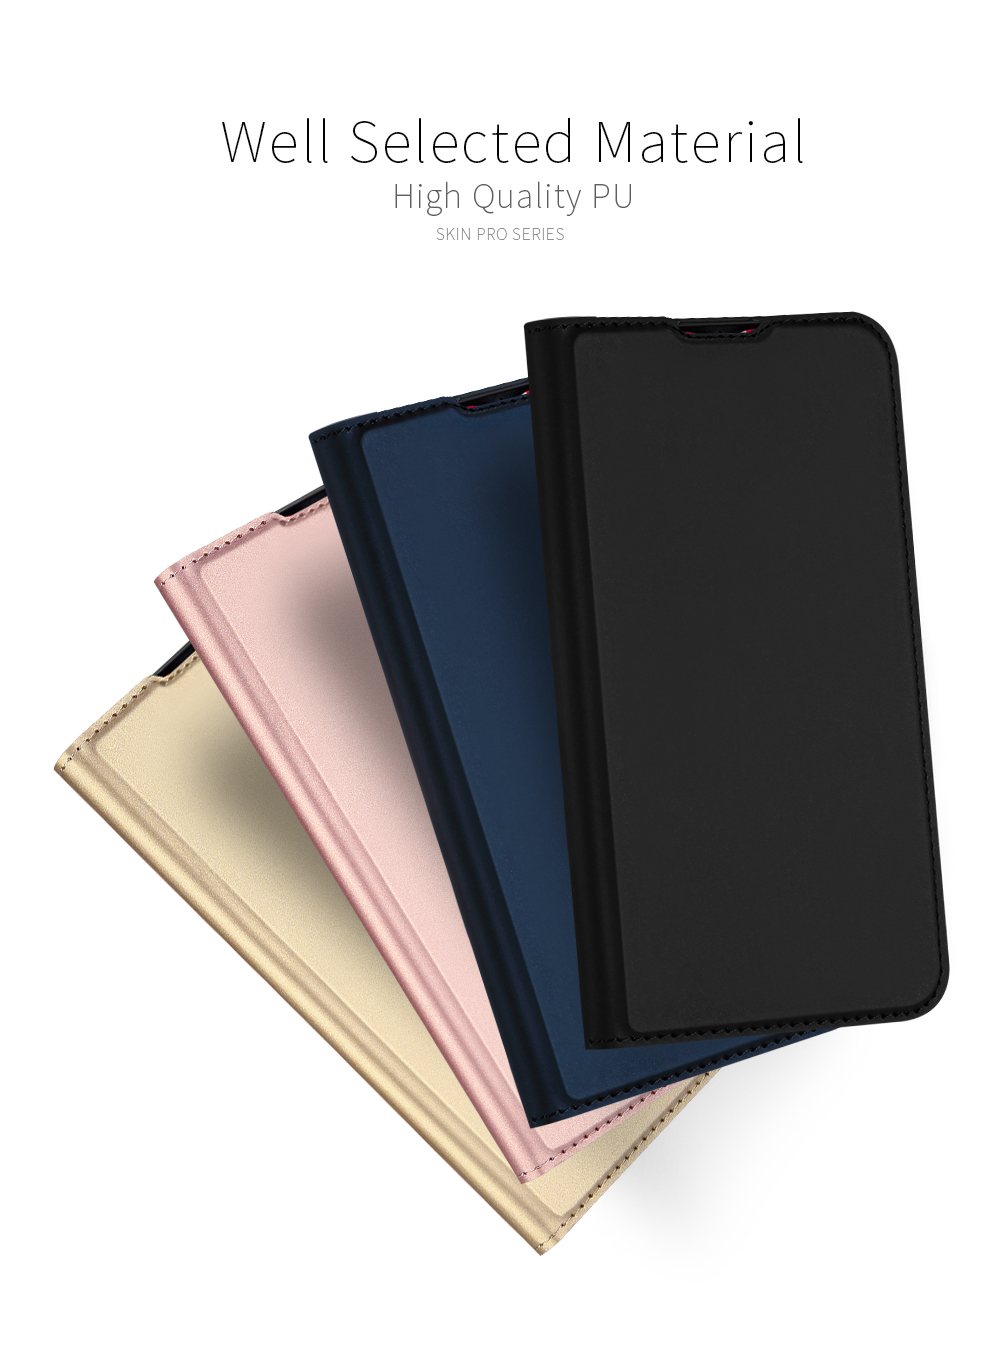 DUX DUCIS Flip Magnetic with Wallet Card Slot PU Leather Protective Case for Xiaomi Redmi Note 8 Pro Non-original